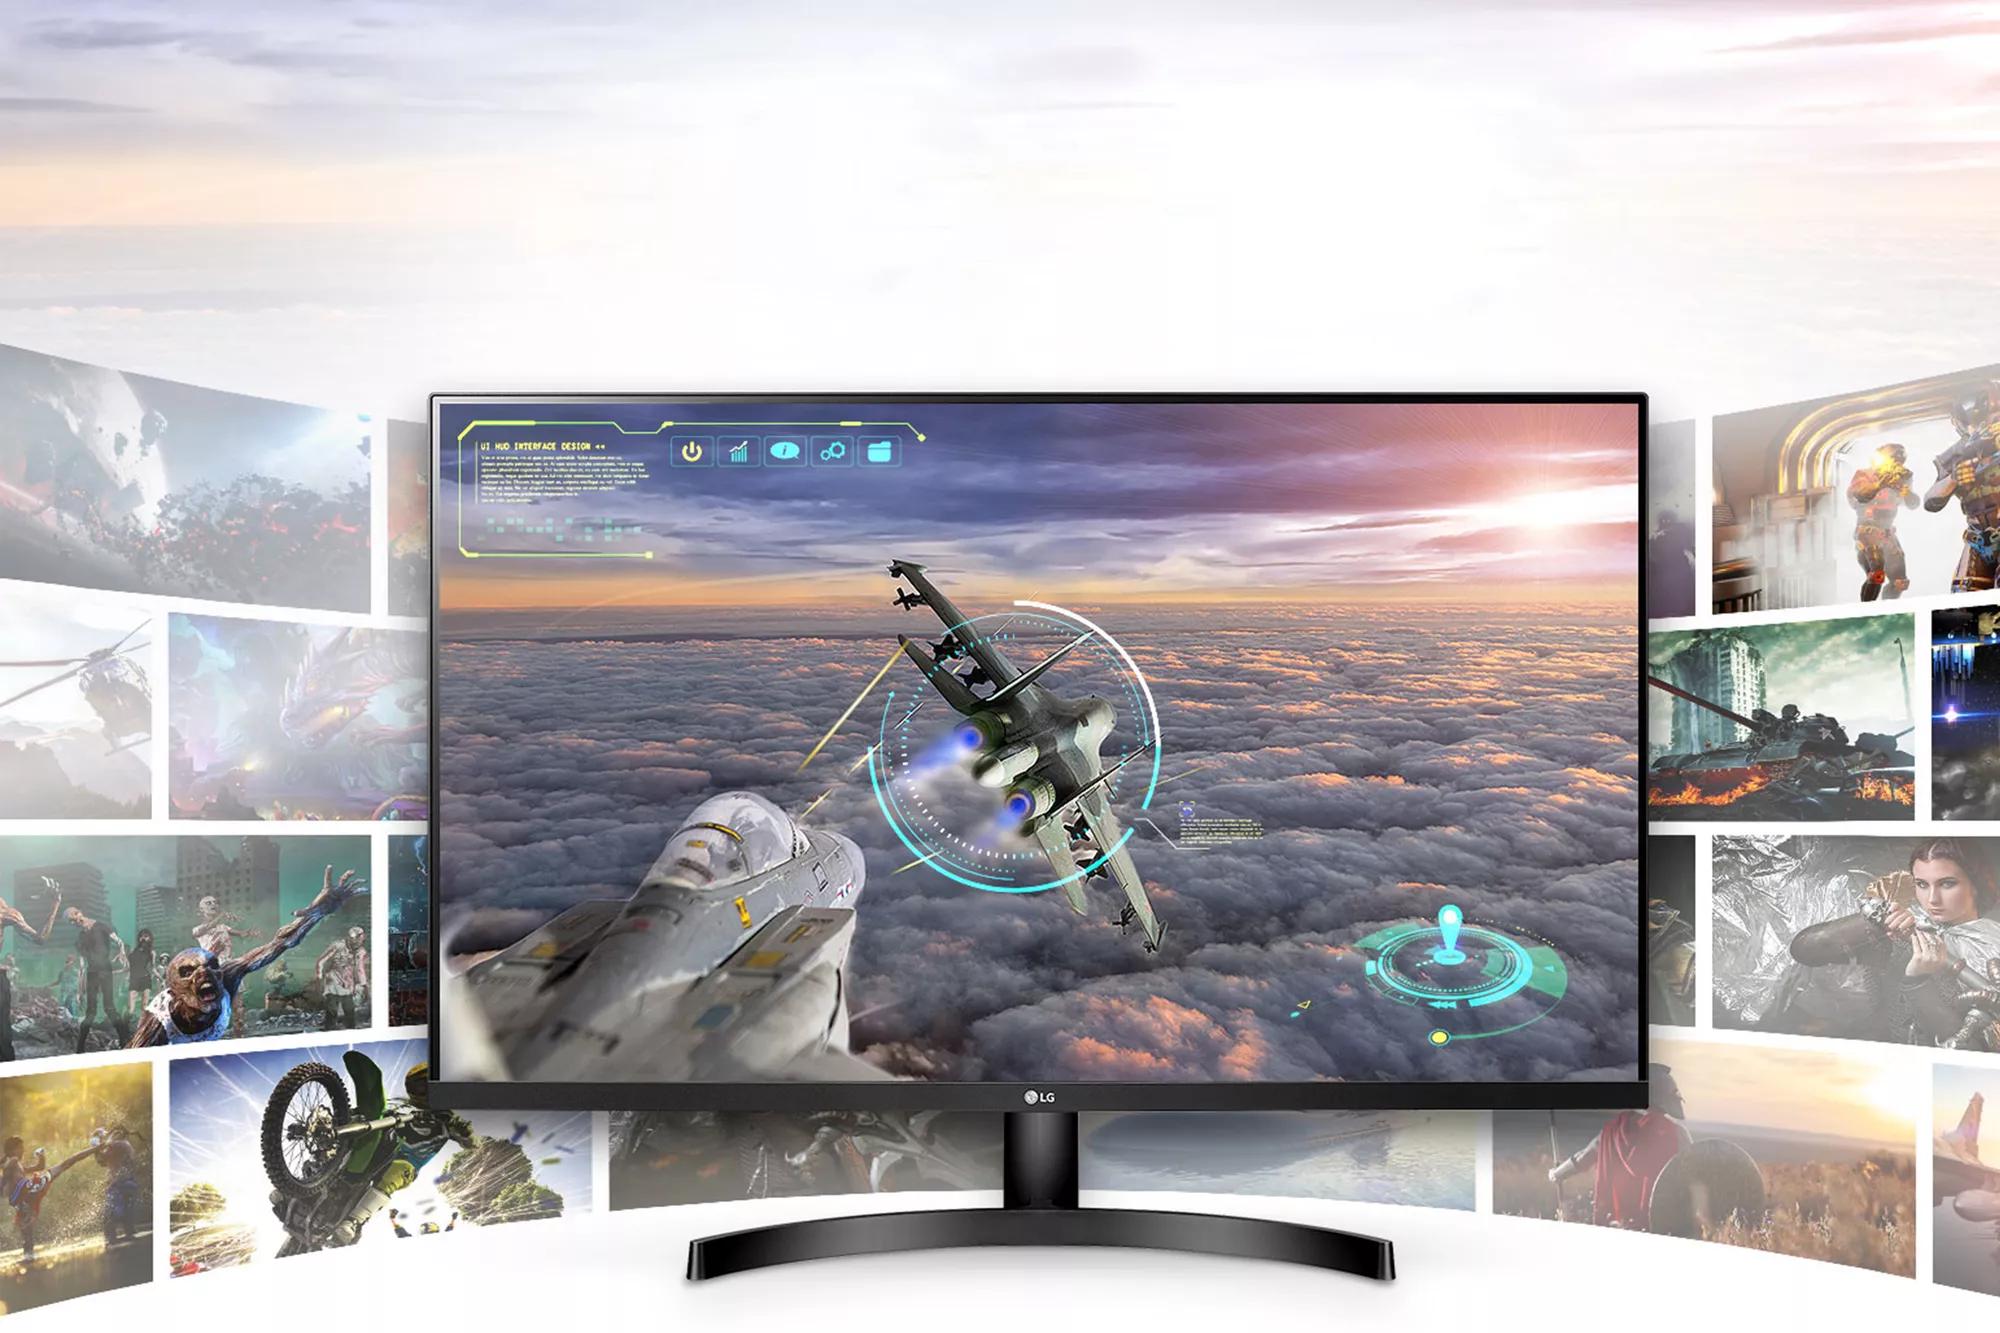 Gaming scene with exceptional clarity and details in LG UHD 4K display